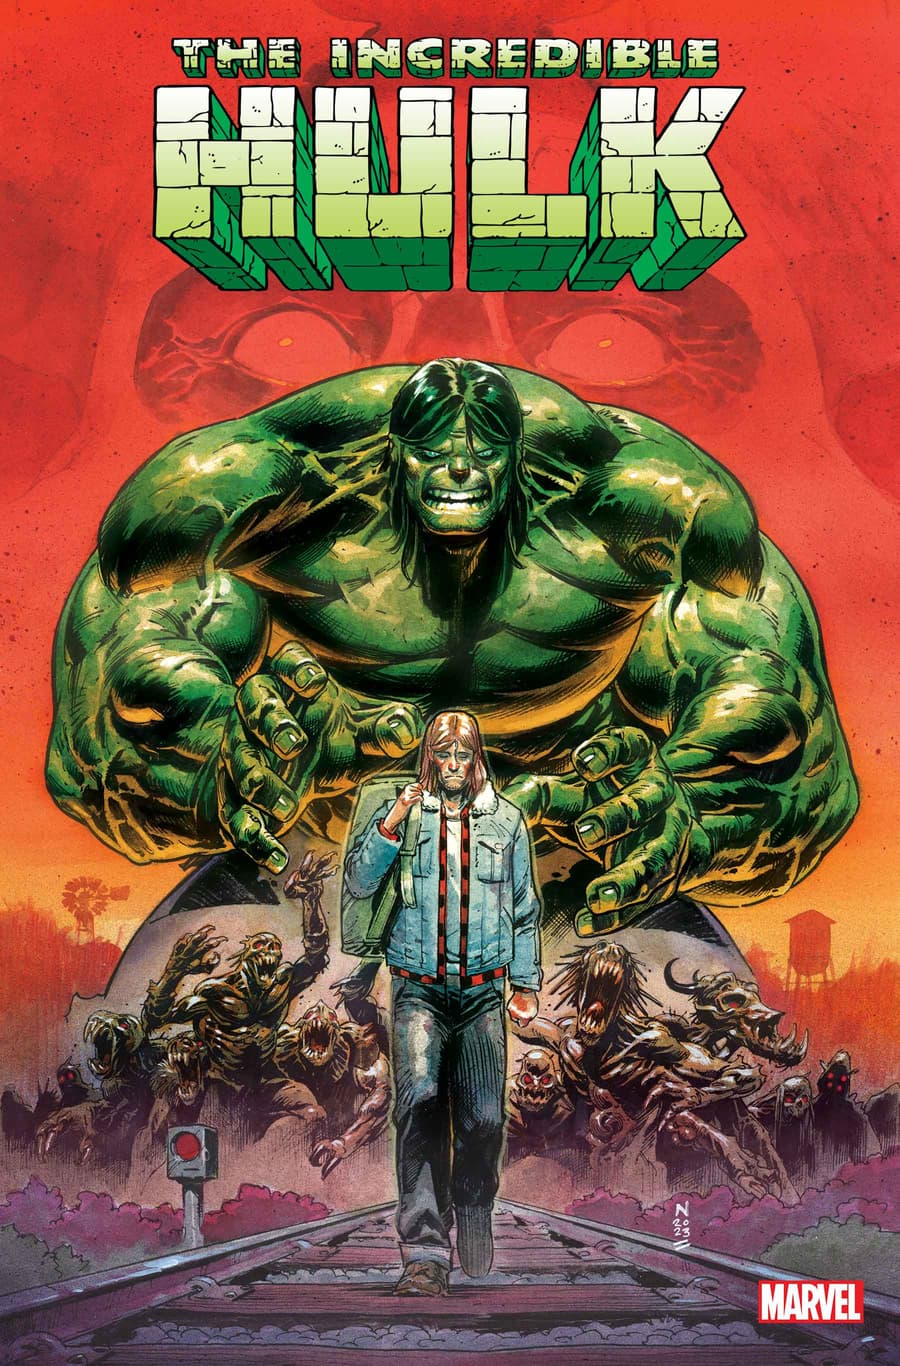 INCREDIBLE HULK #1 cover by Nic Klein